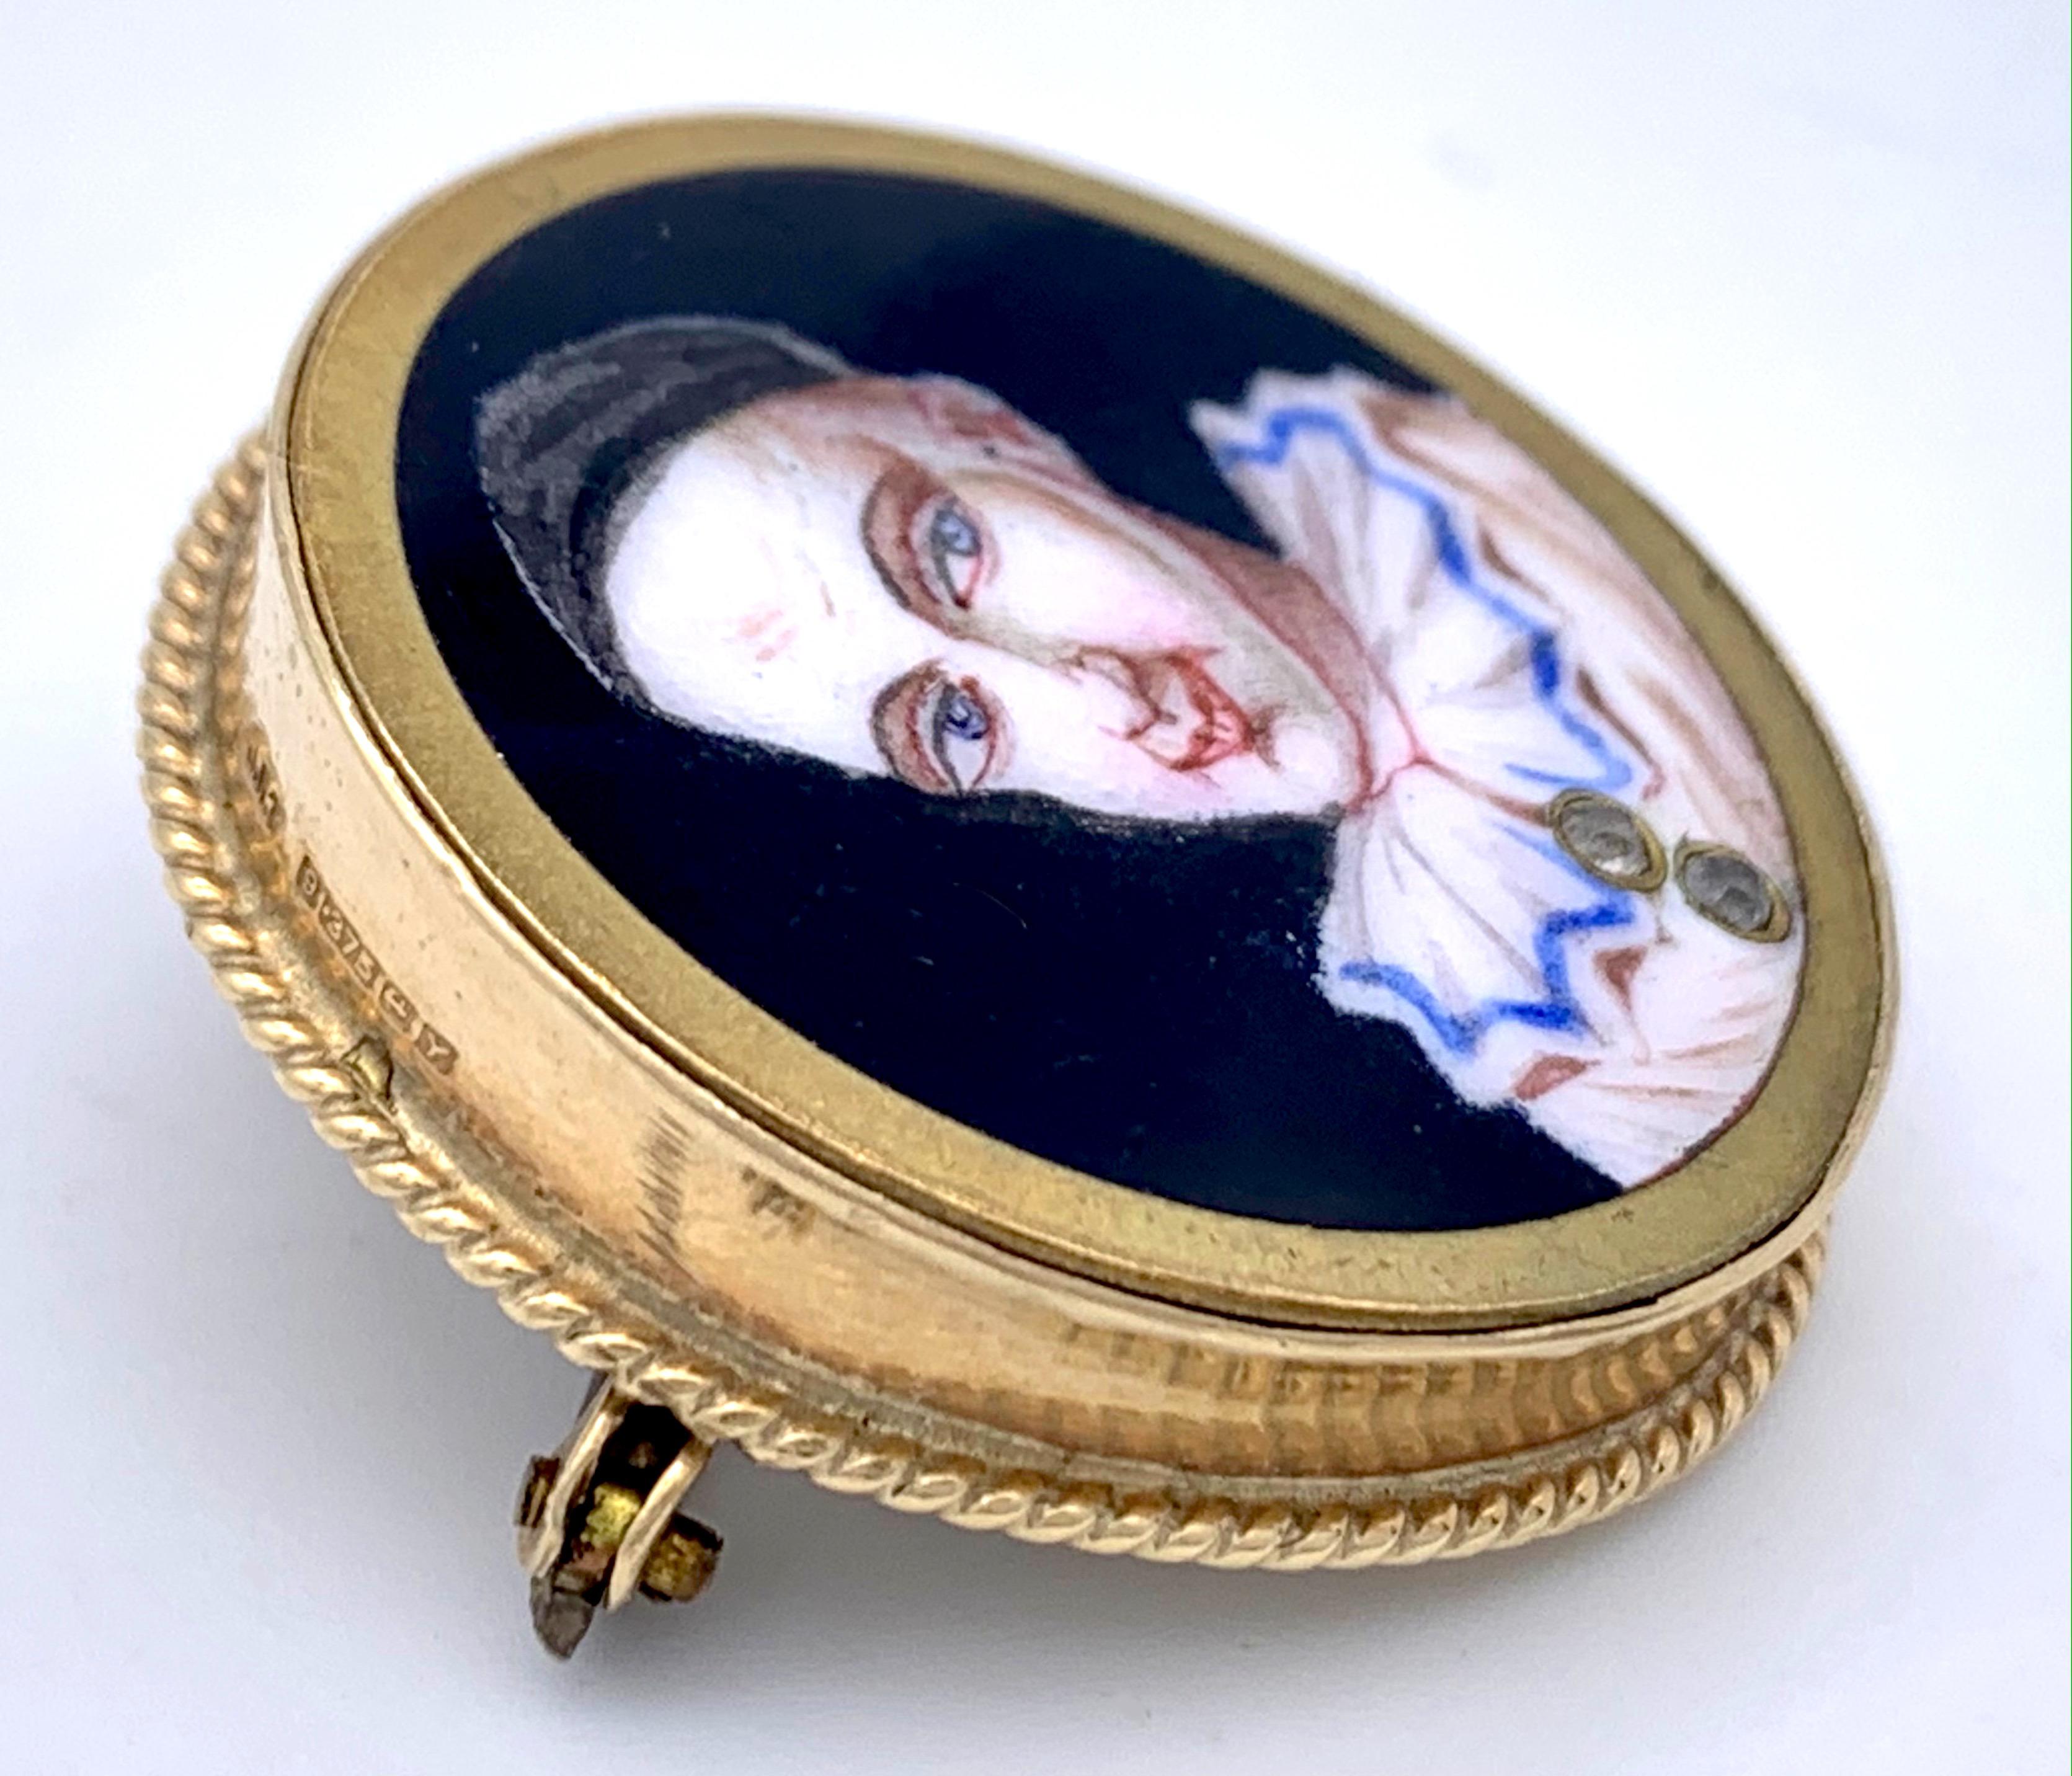 This charming and unusual Pierrot brooch ist made out of 9 karat gold and has been hand painted with polychrome enamel.
The buttons of the Pierrot's costume are set with rose cut diamonds.  This much loved brooch has some light scraches to the